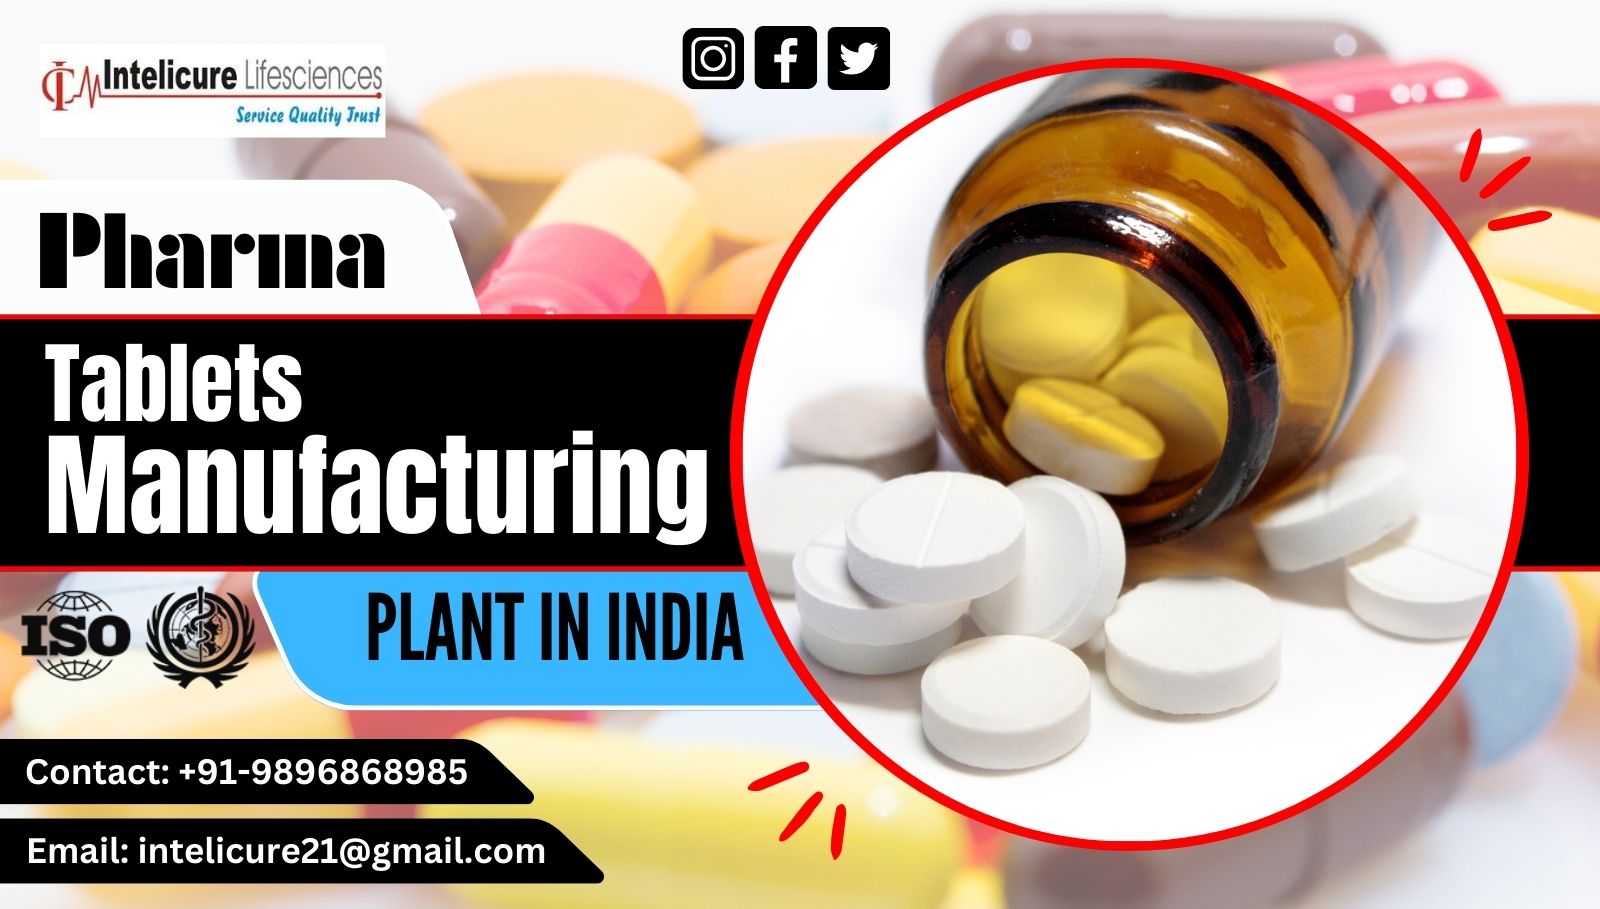 Which company has the best Pharma tablets manufacturing plant in India? | Intelicure Lifesciences